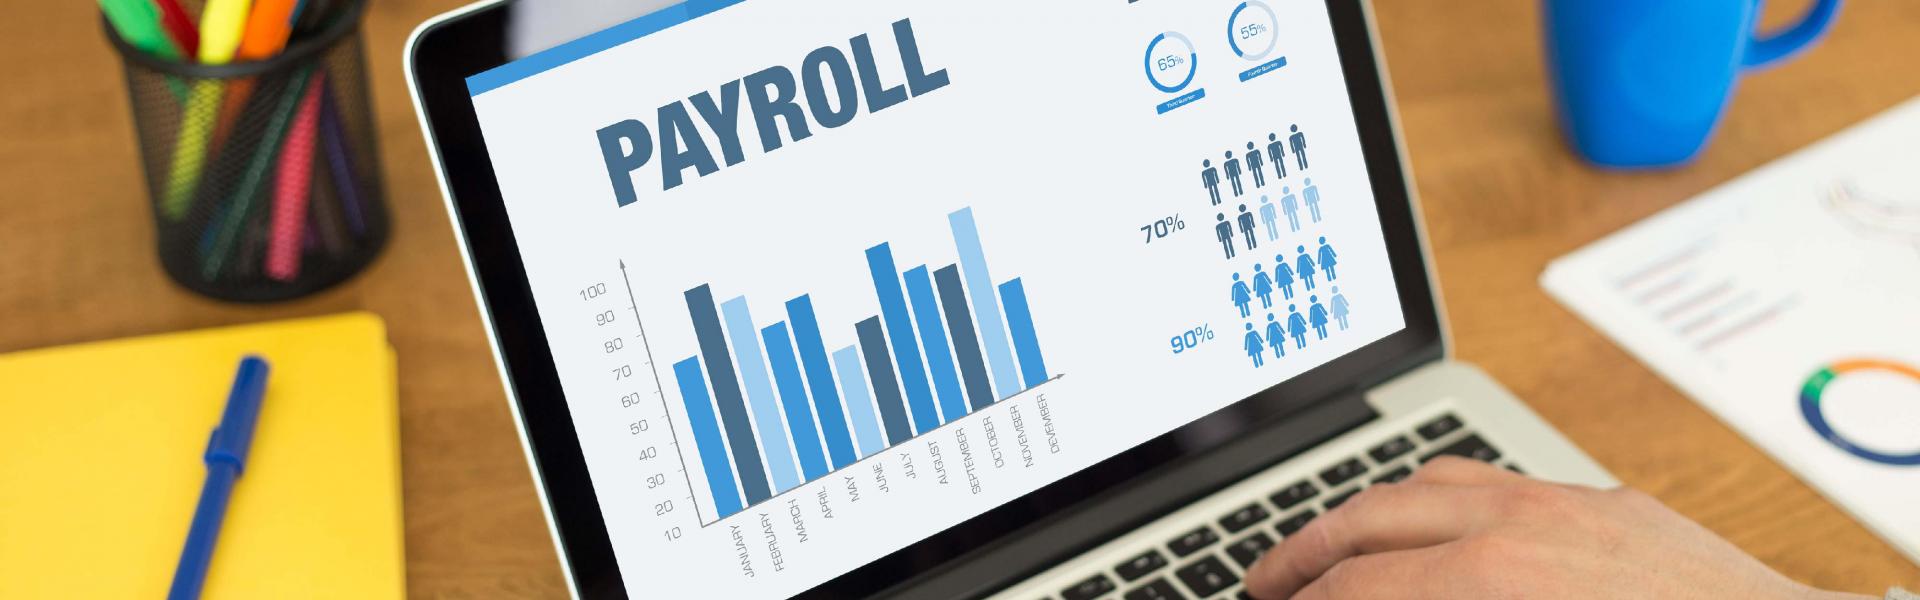 Exela HR Solutions blog on avoiding risks and increasing compliance using global payroll processing services.